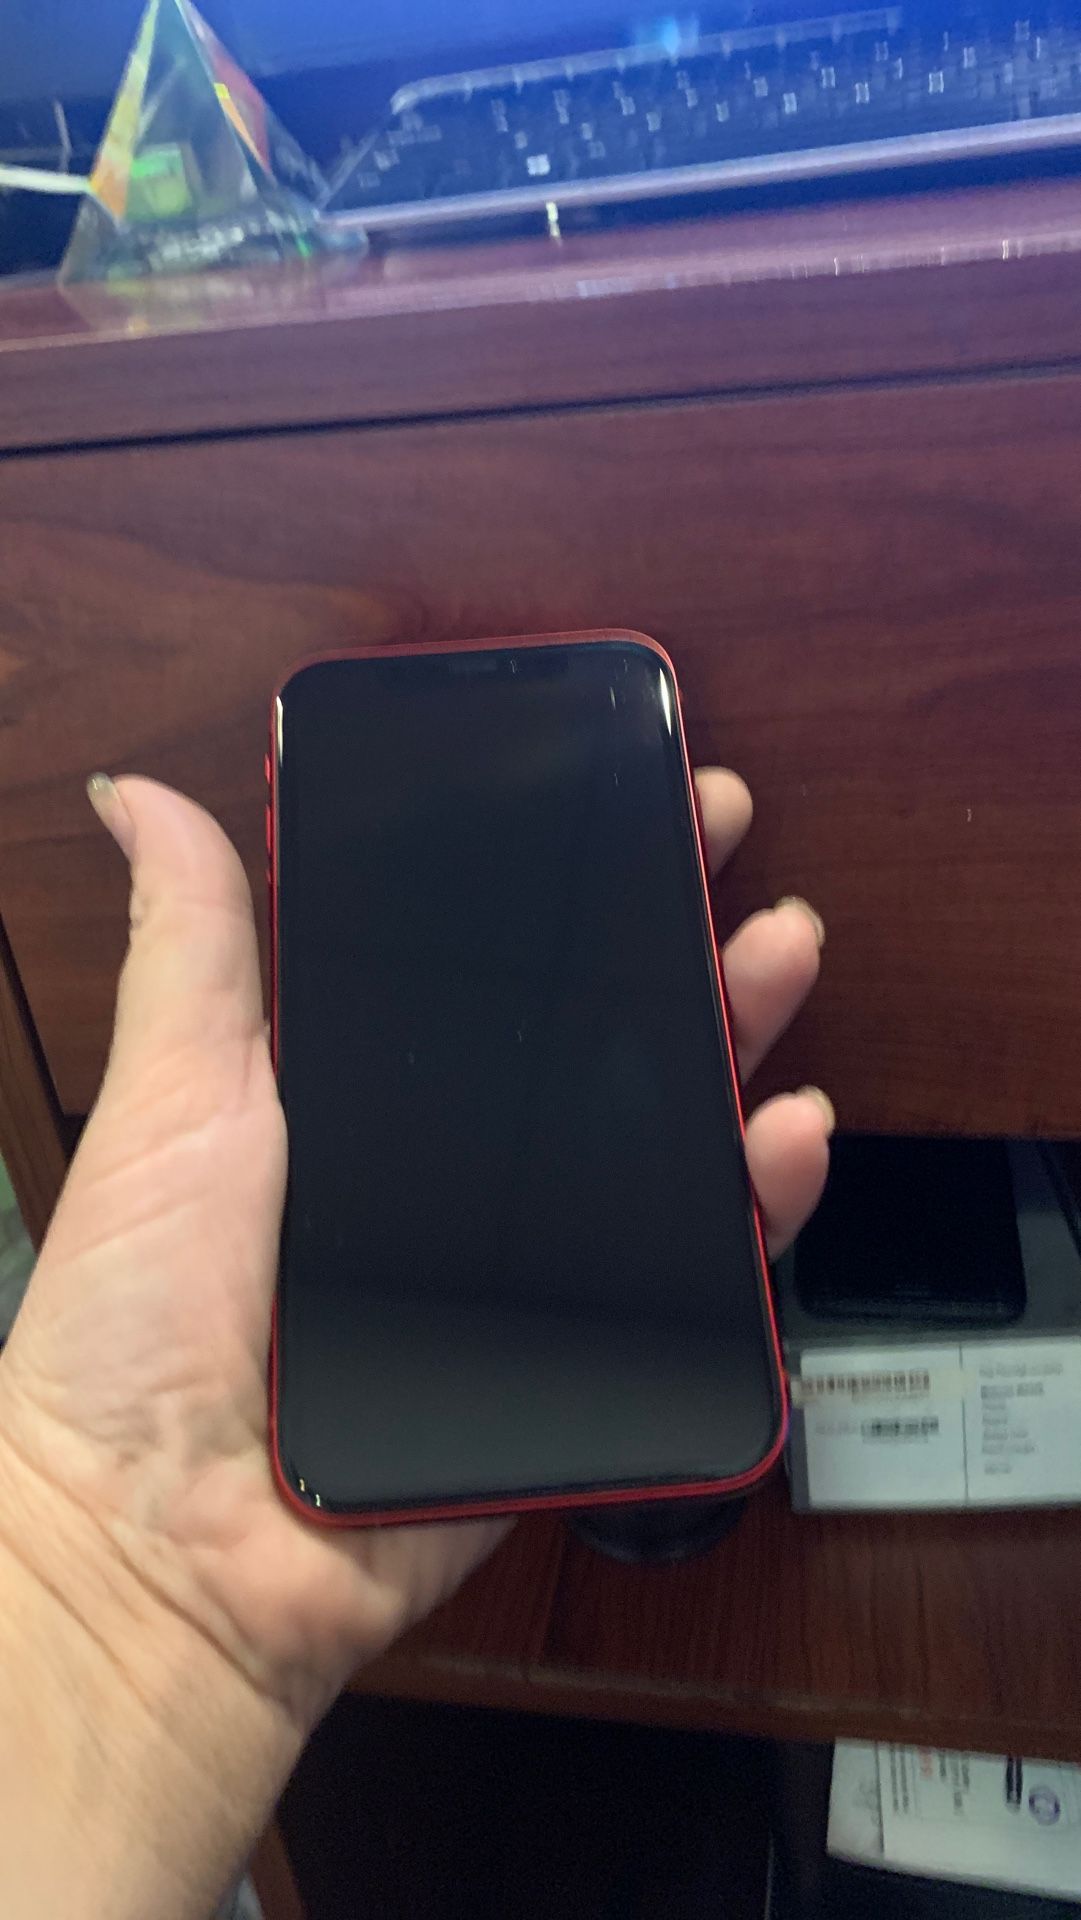 iPhone XR red 64 gb att or cricket . Clean imei att or cricket . Like new no dents no scratches . Just the phone no box no accessories .